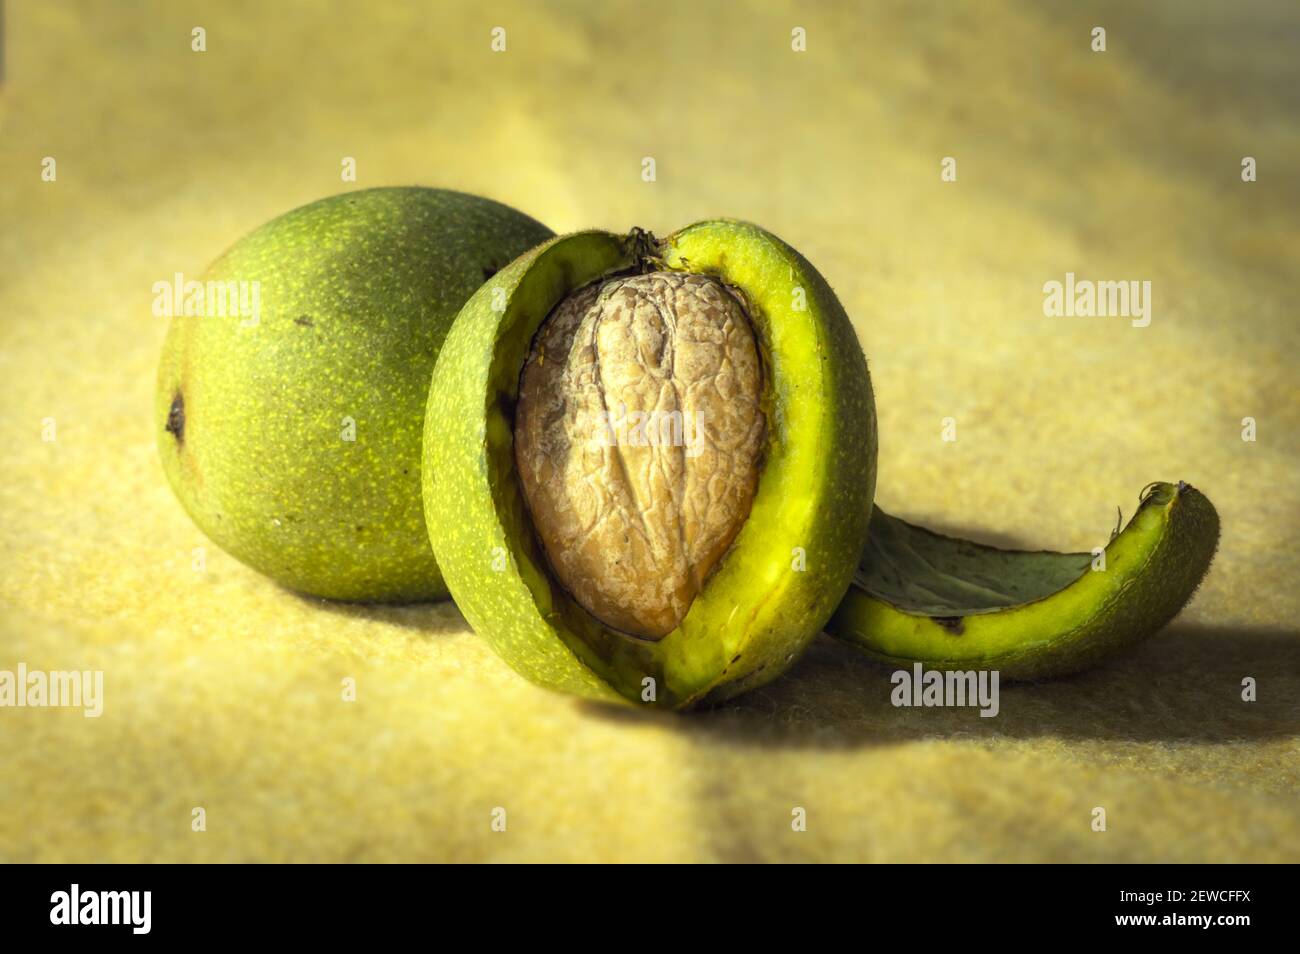 Walnut closed yet unripe inside the fruit with a yellow background Stock Photo